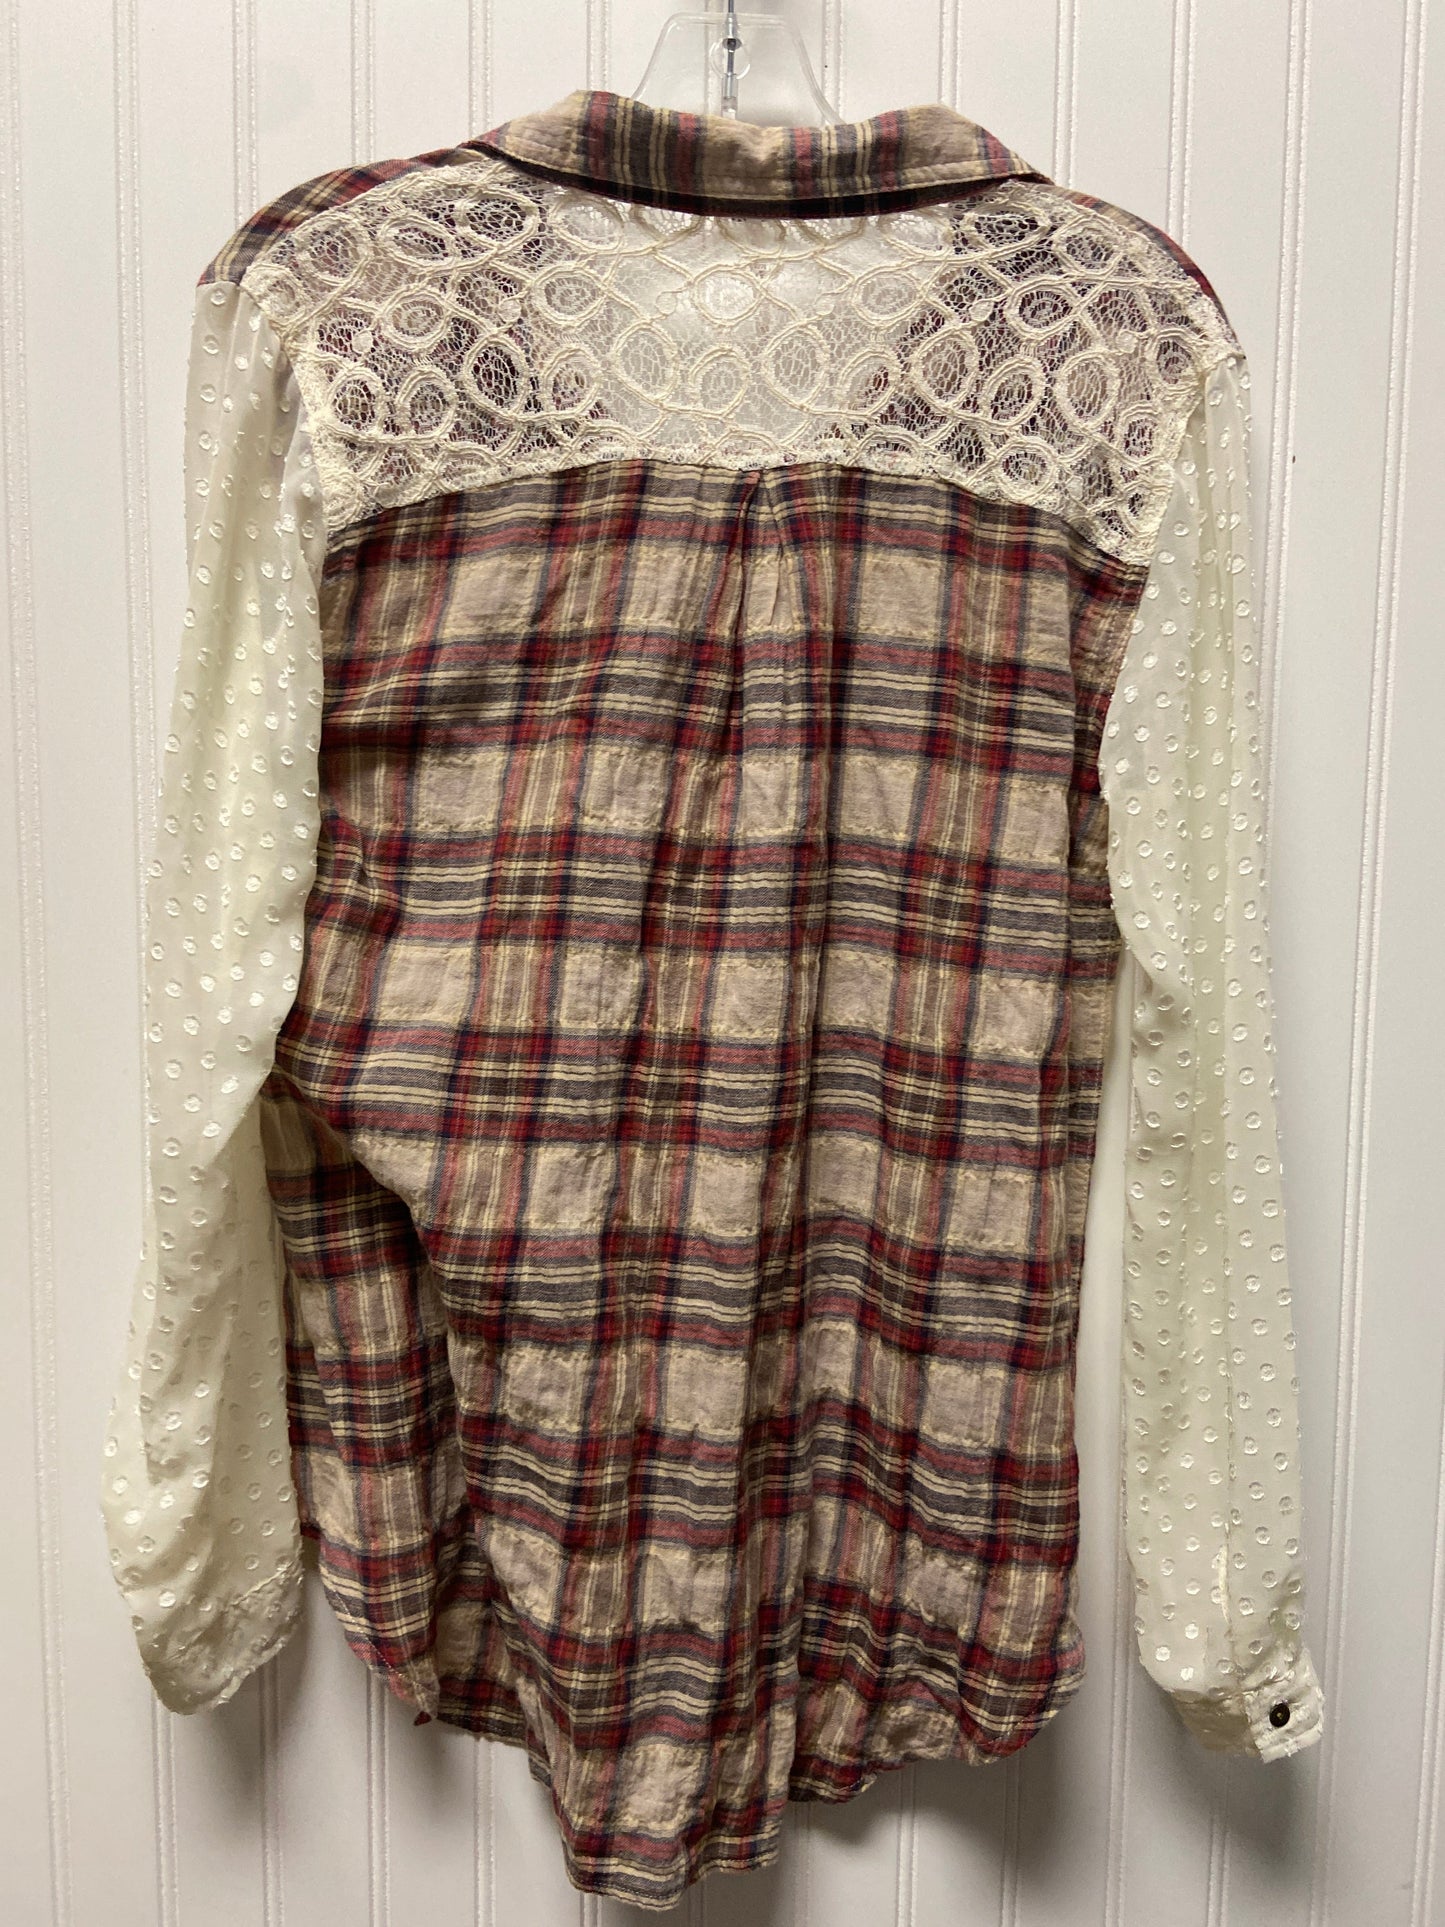 Plaid Pattern Top Long Sleeve Free People, Size Xs